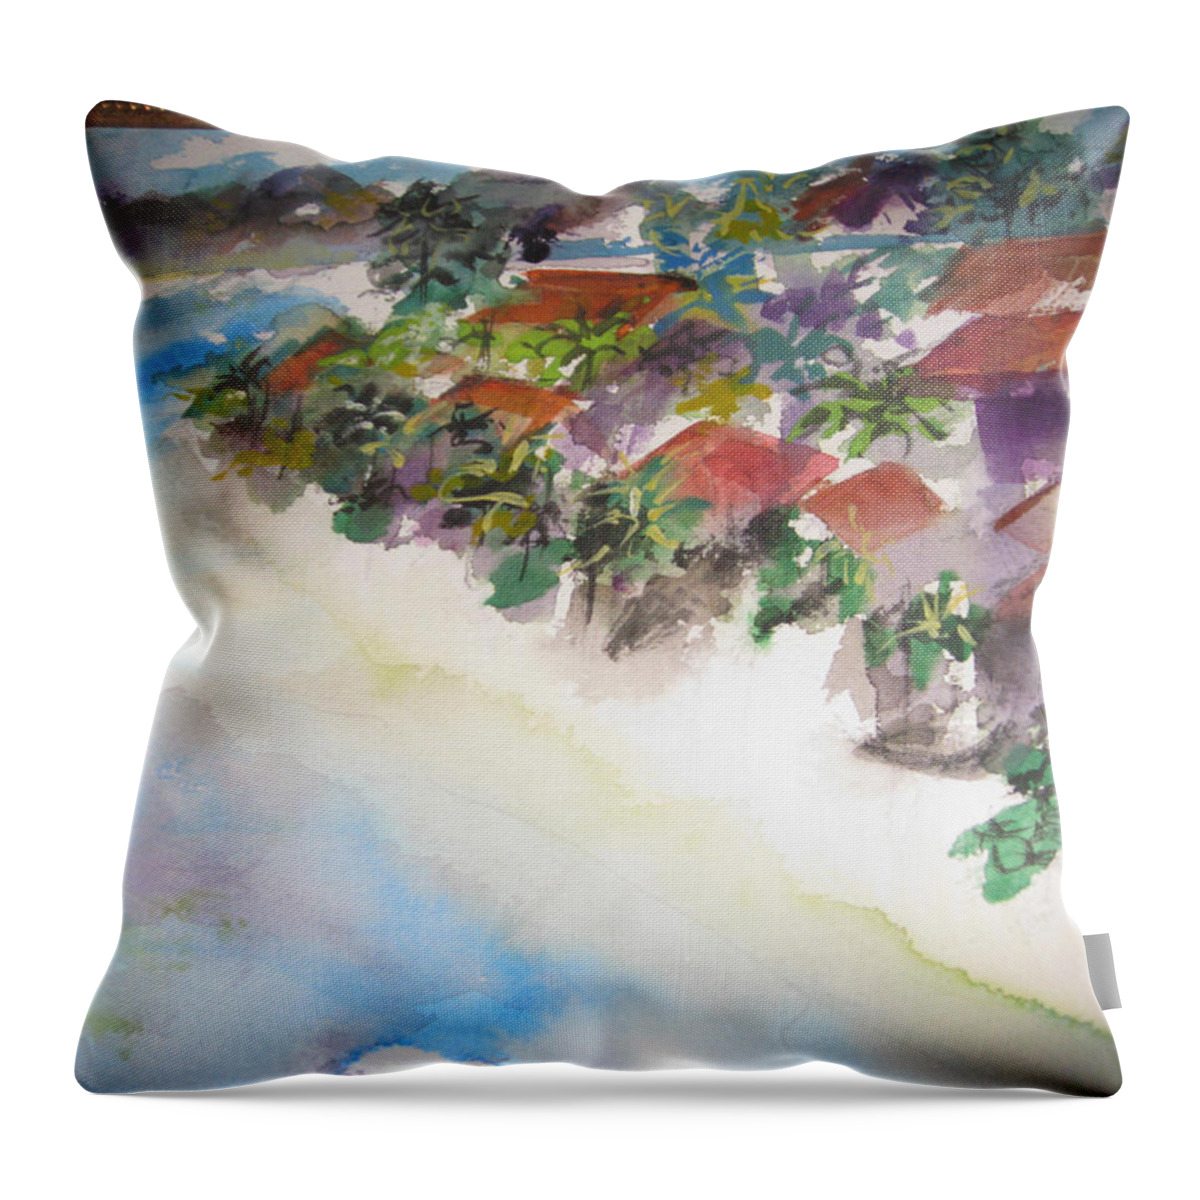 This Is A Scene Of A Seashore In Bali Throw Pillow featuring the painting Seashore in Bali by Lucille Valentino